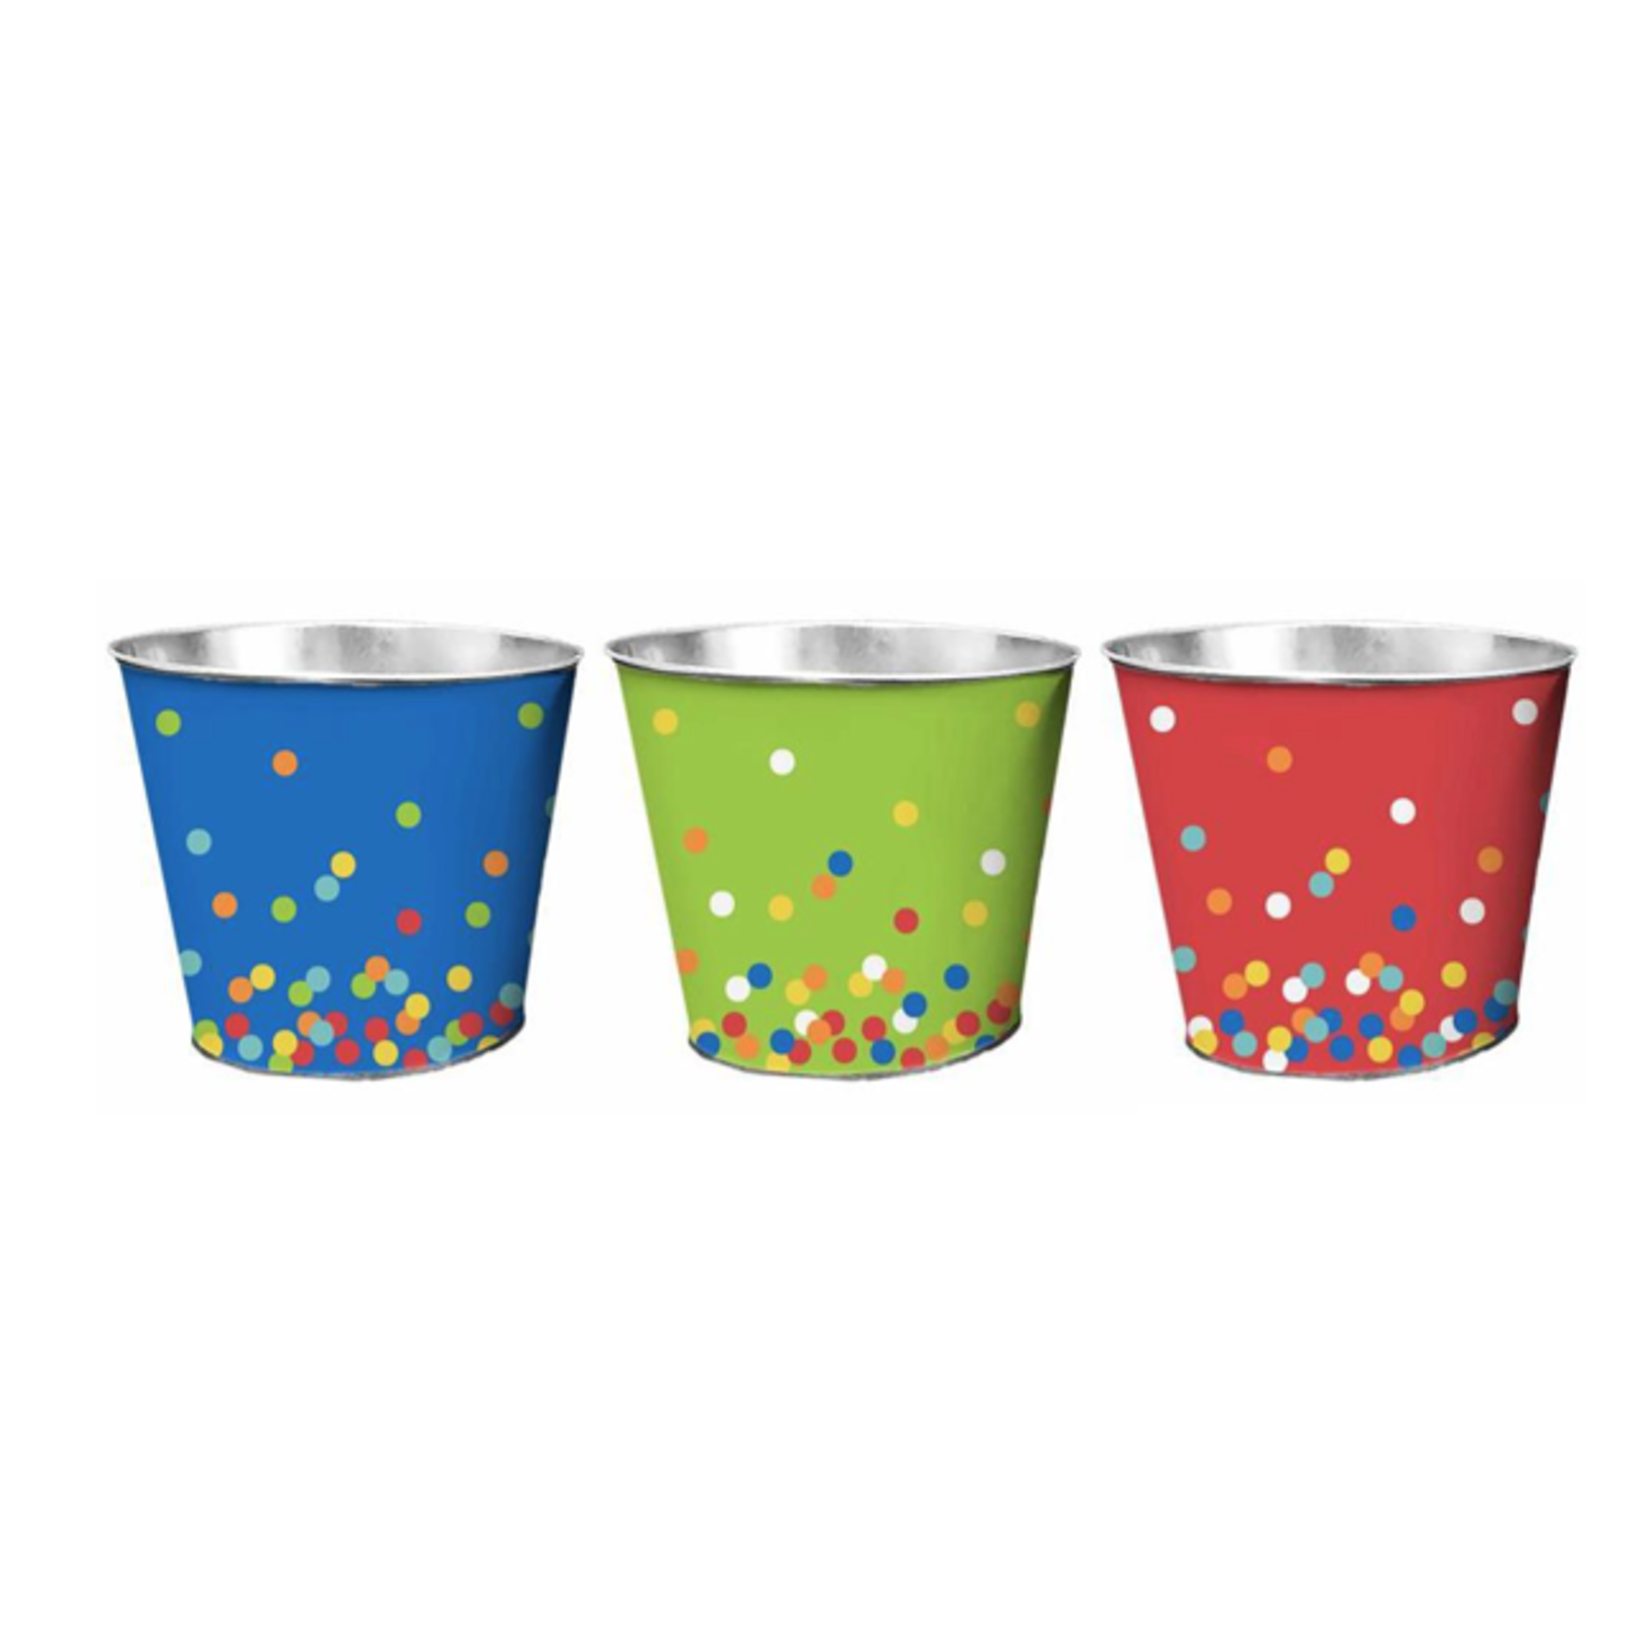 5" PARTY POT COVERS (PRICE PER EACH, BOX HAS ASSORTMENT)